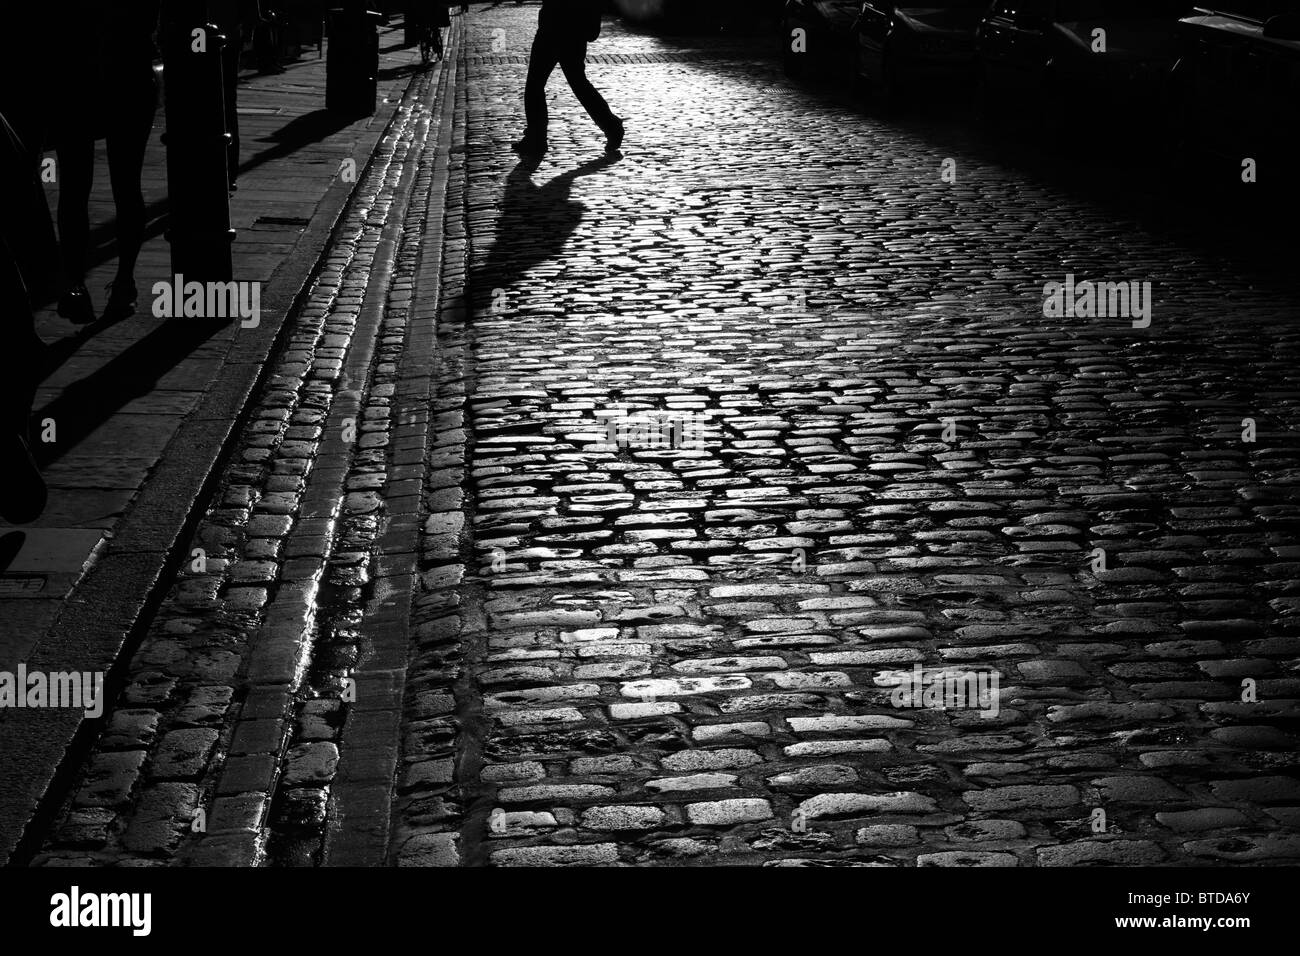 Silhouettes and shadows on the cobbles of Earlham Street, Seven Dials, Covent Garden, London, UK Stock Photo